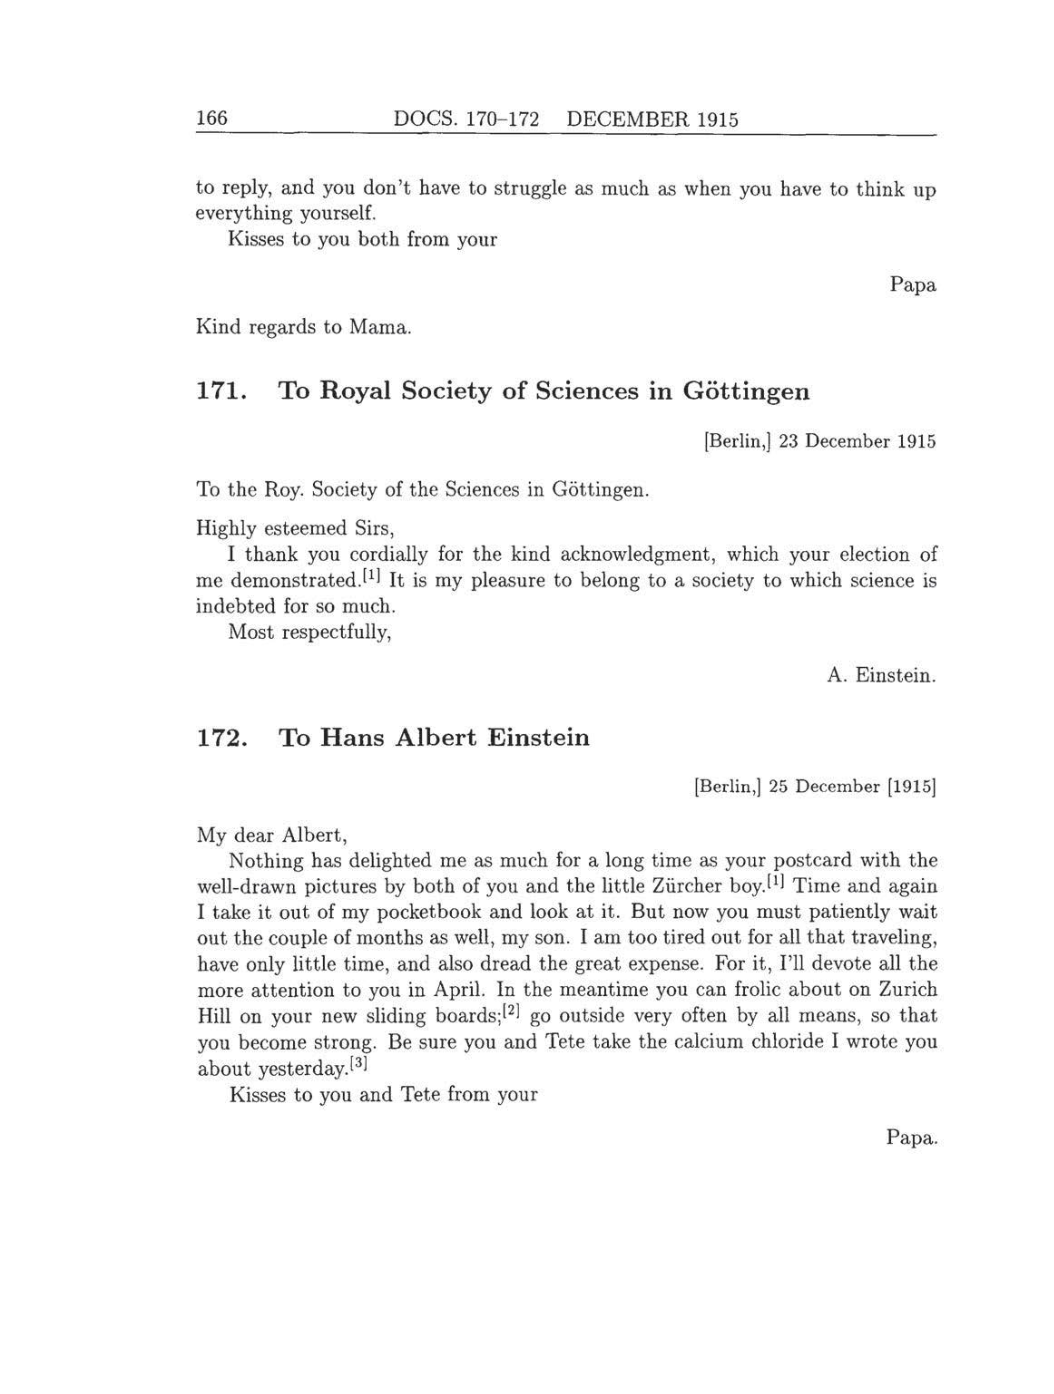 Volume 8: The Berlin Years: Correspondence, 1914-1918 (English translation supplement) page 166